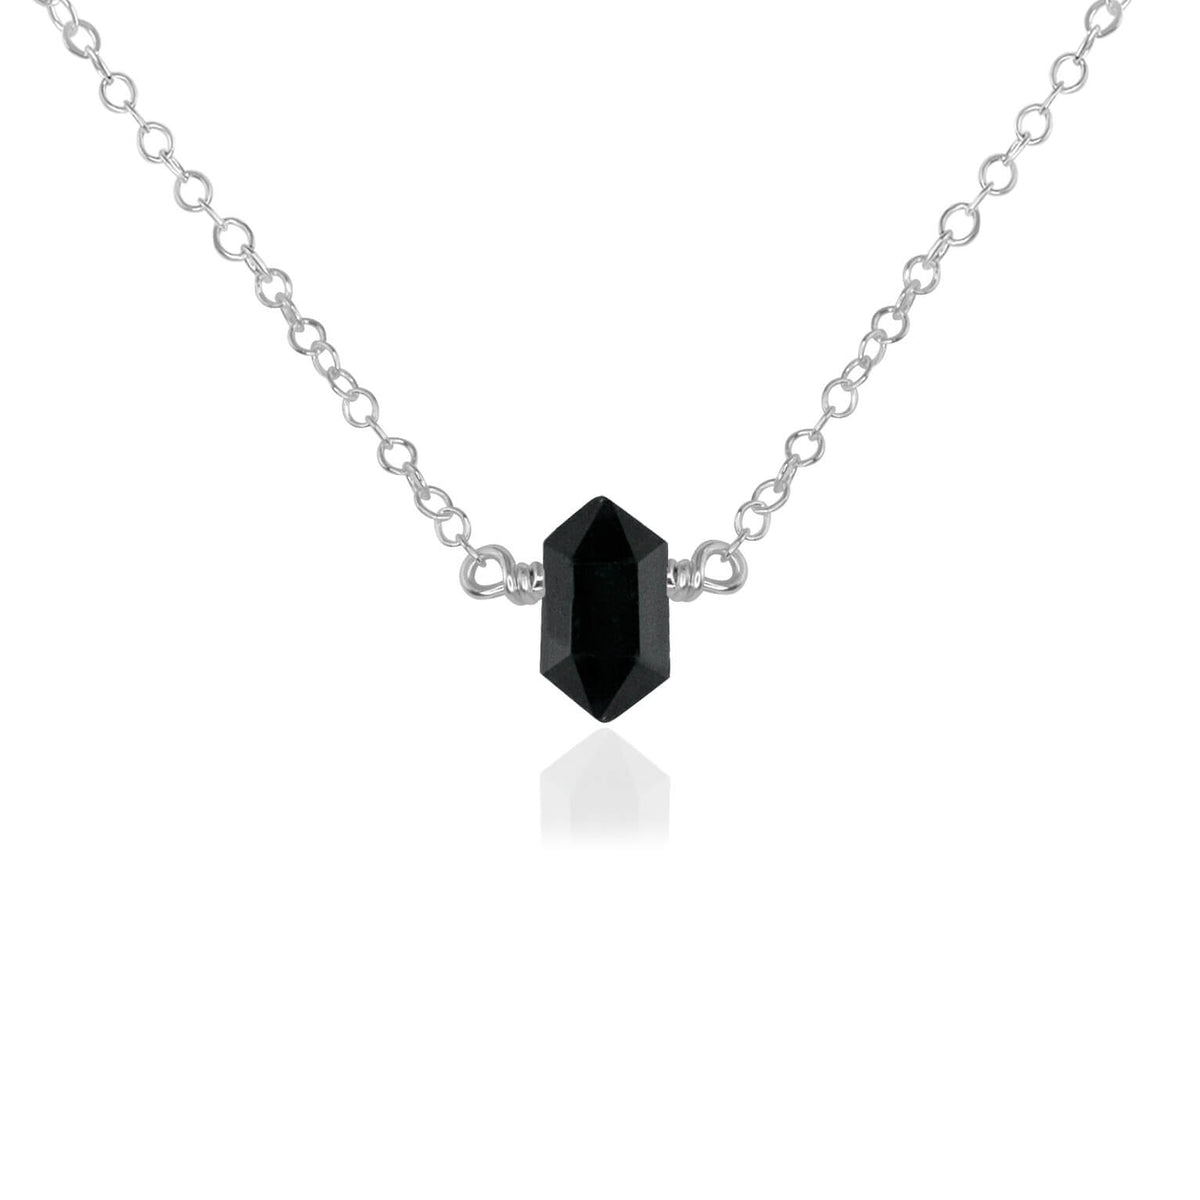 Double Terminated Crystal Necklace - Black Tourmaline - Sterling Silver - Luna Tide Handmade Jewellery